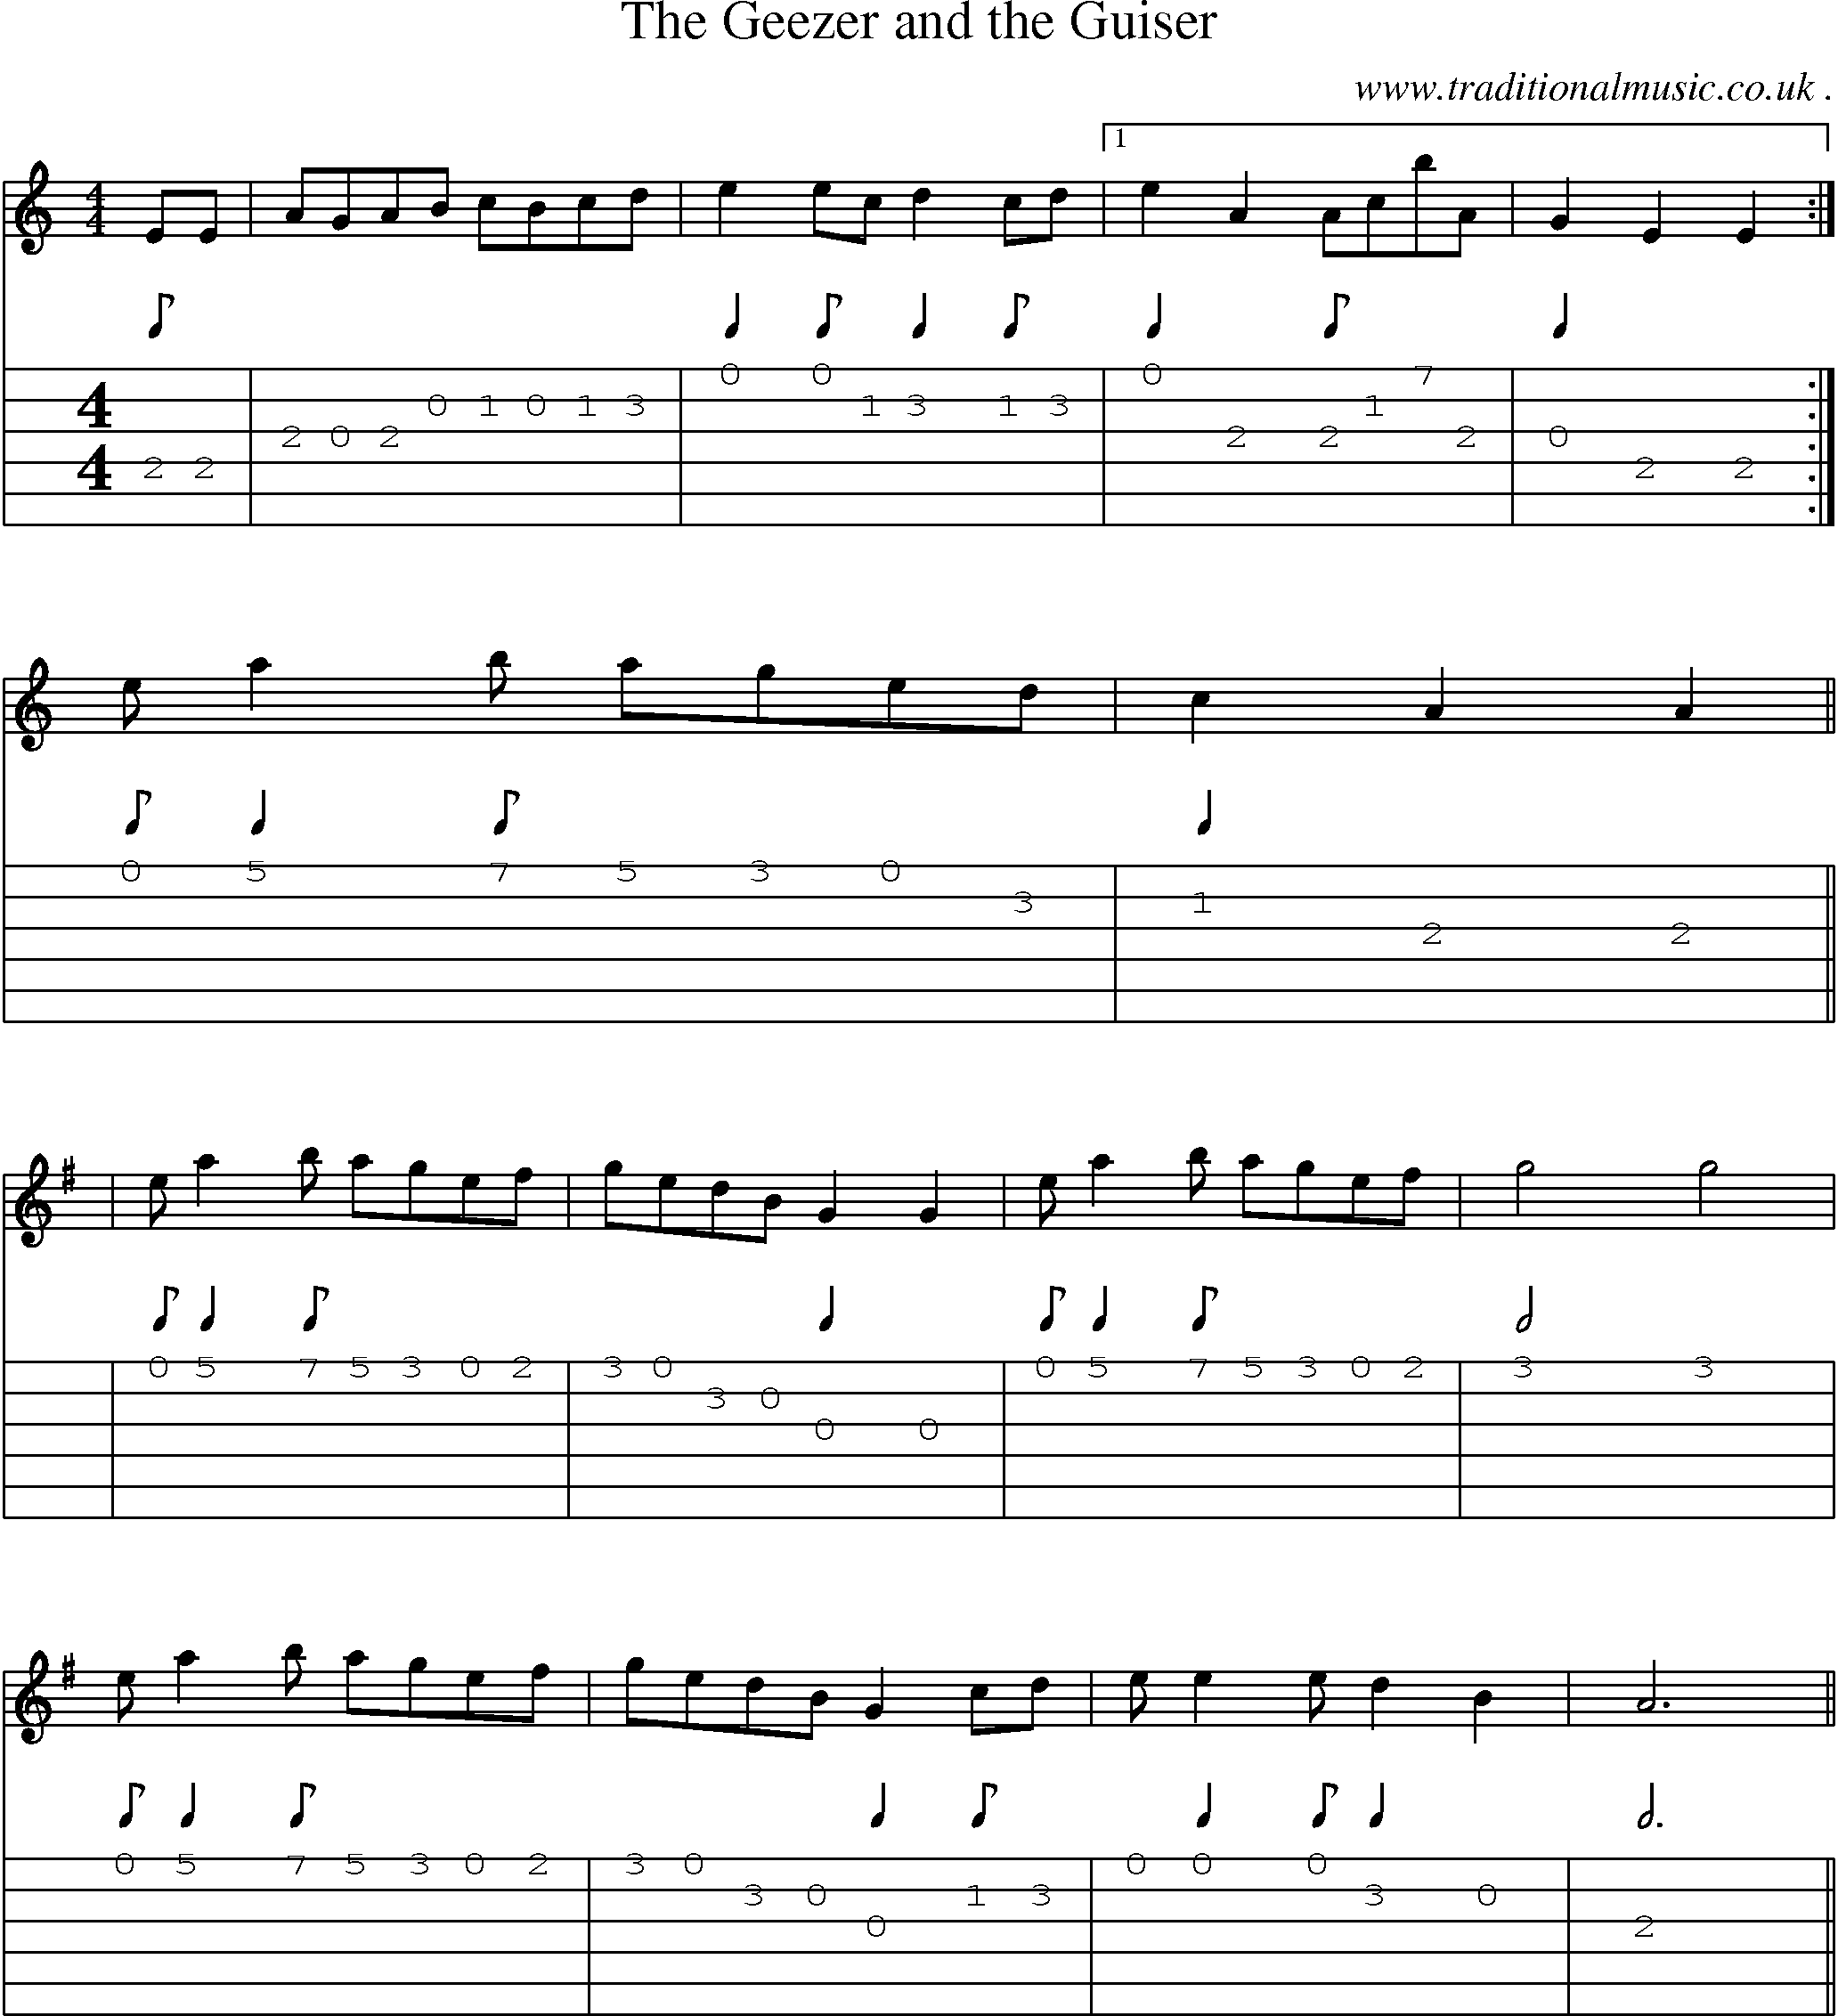 Sheet-Music and Guitar Tabs for The Geezer And The Guiser